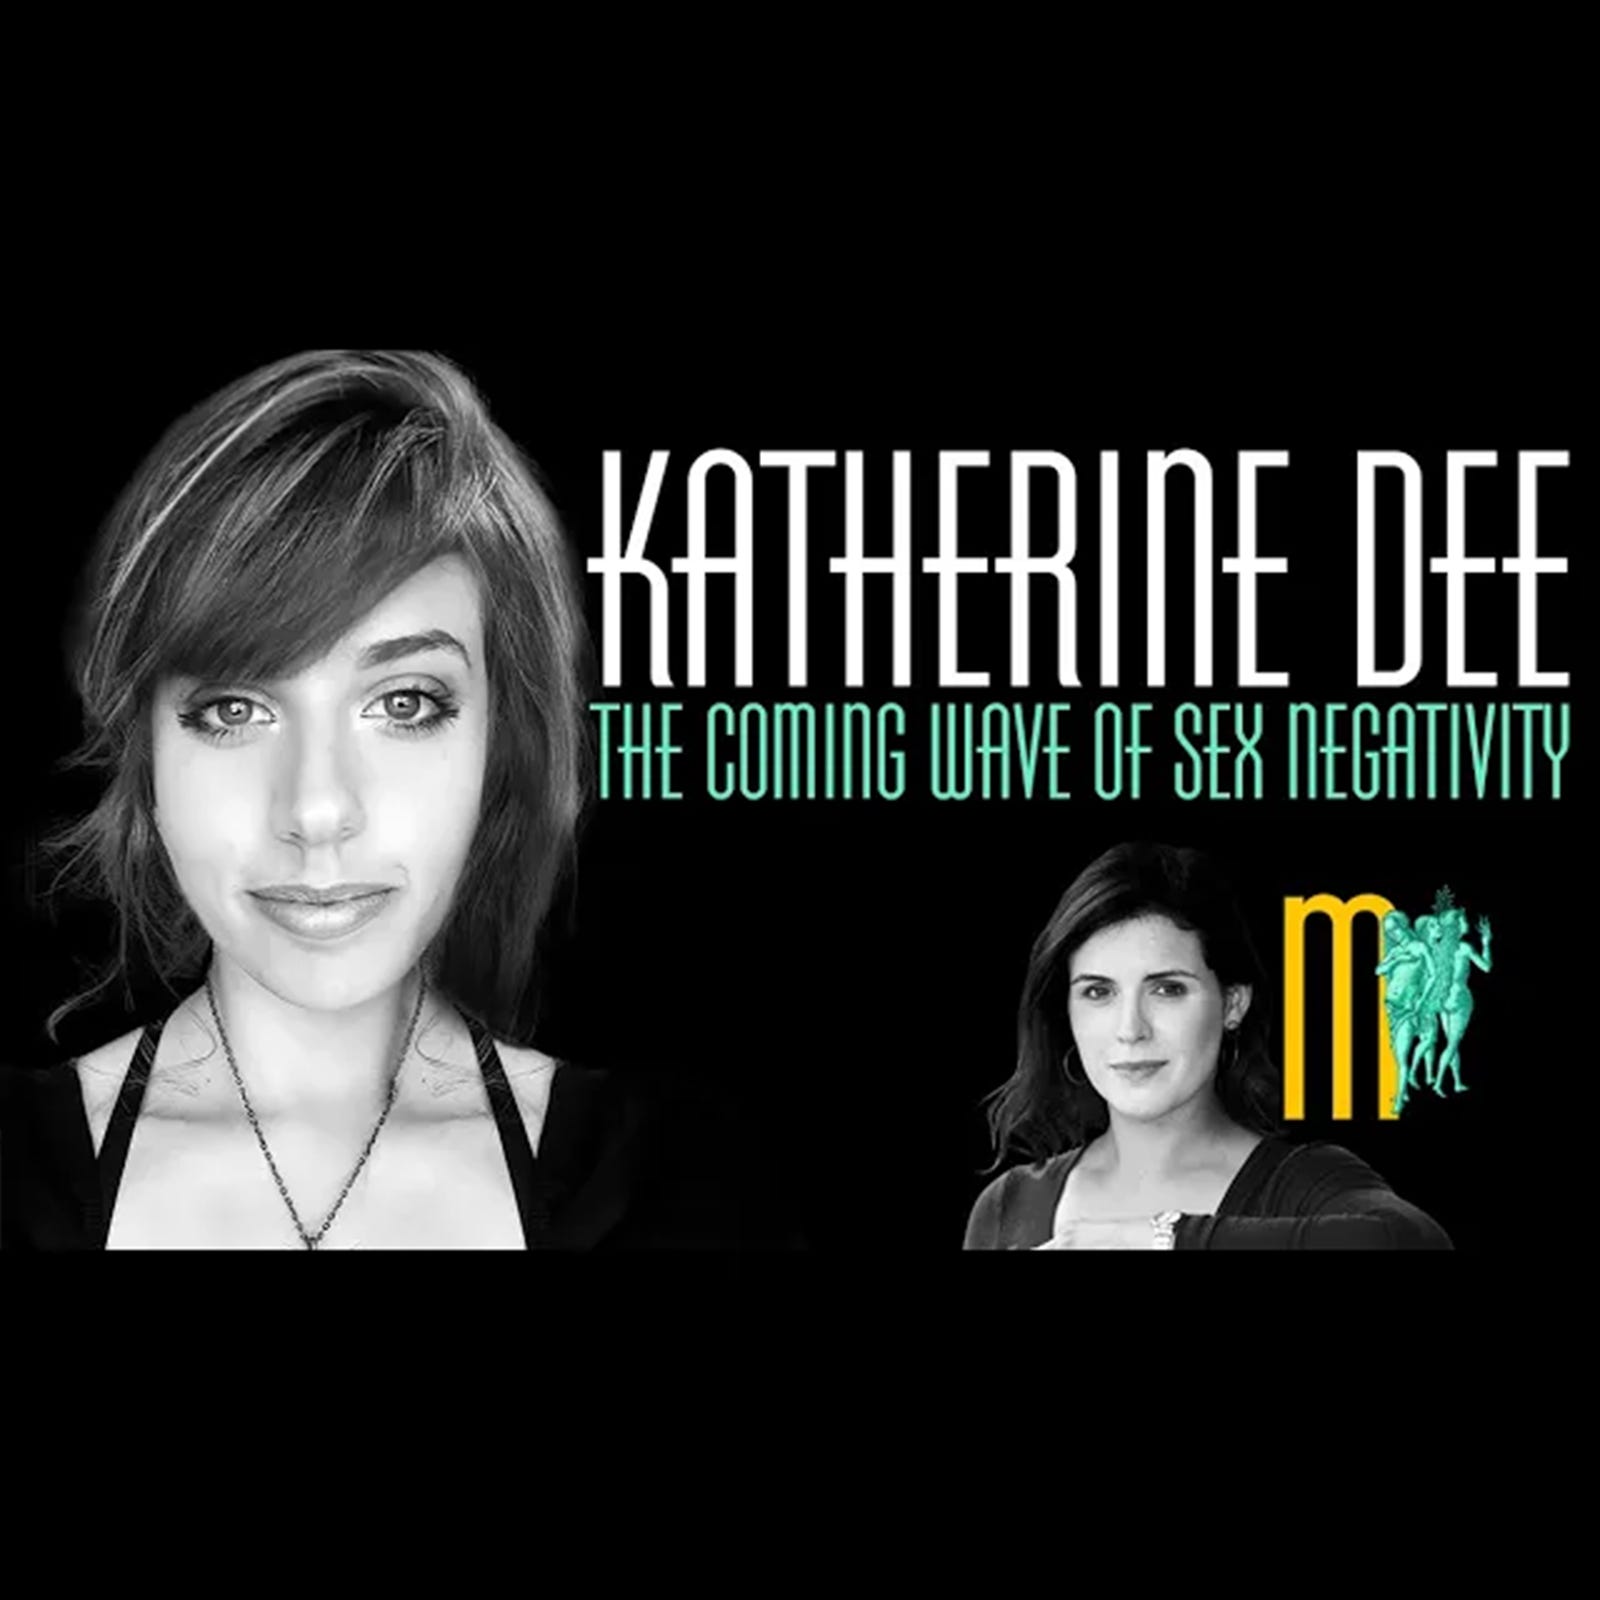 4: The Coming Wave of Sex Negativity - Katherine Dee | Maiden Mother Matriarch 4